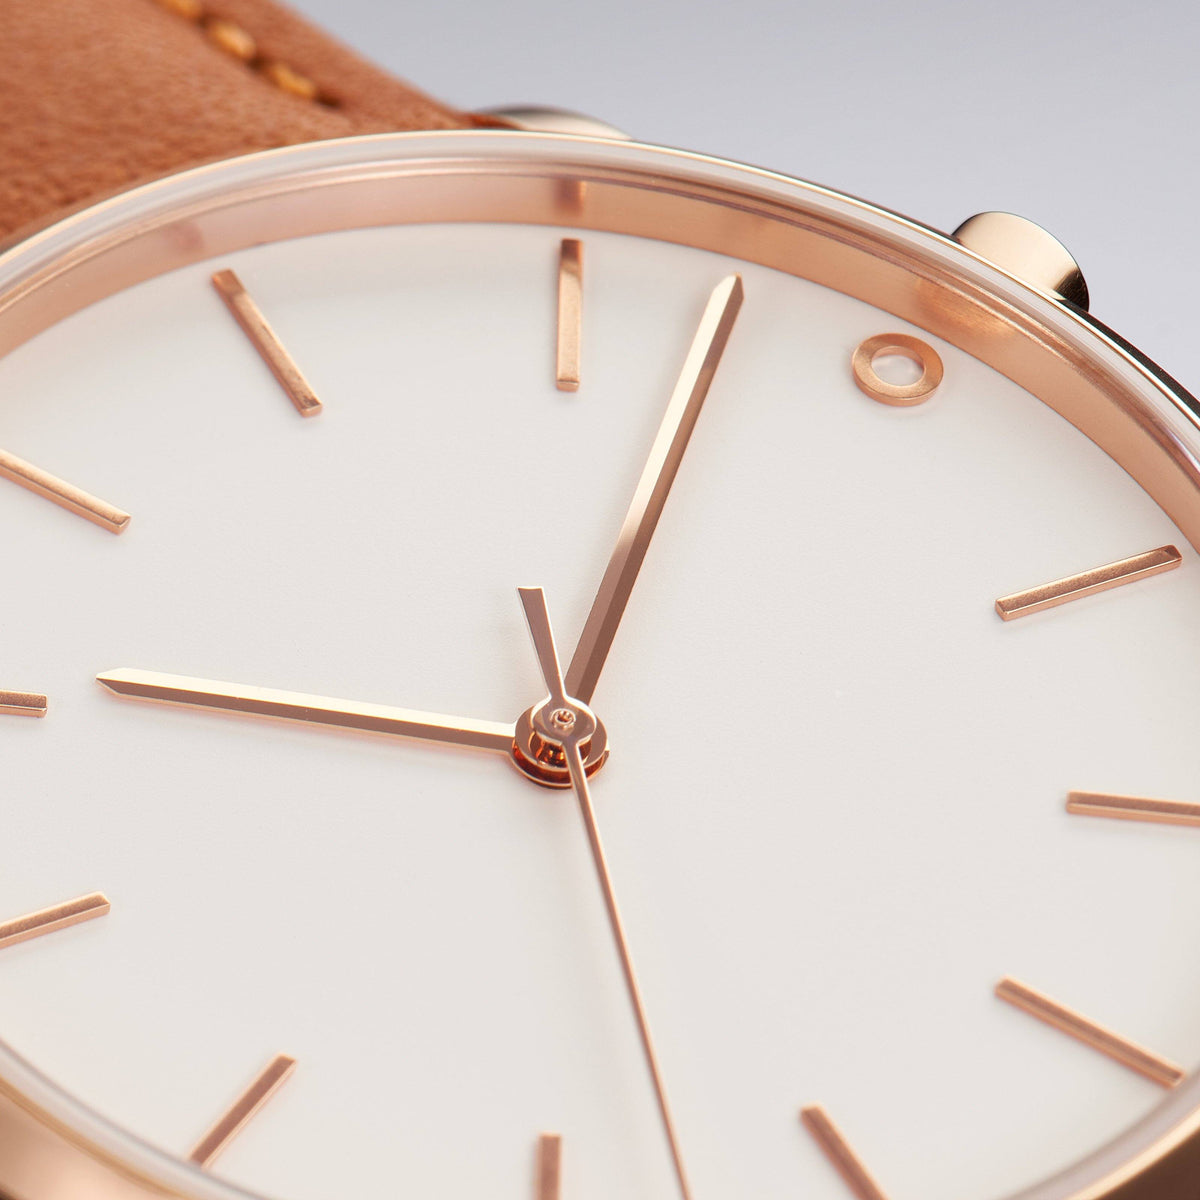 The White and Rose Gold Watch -  NATO